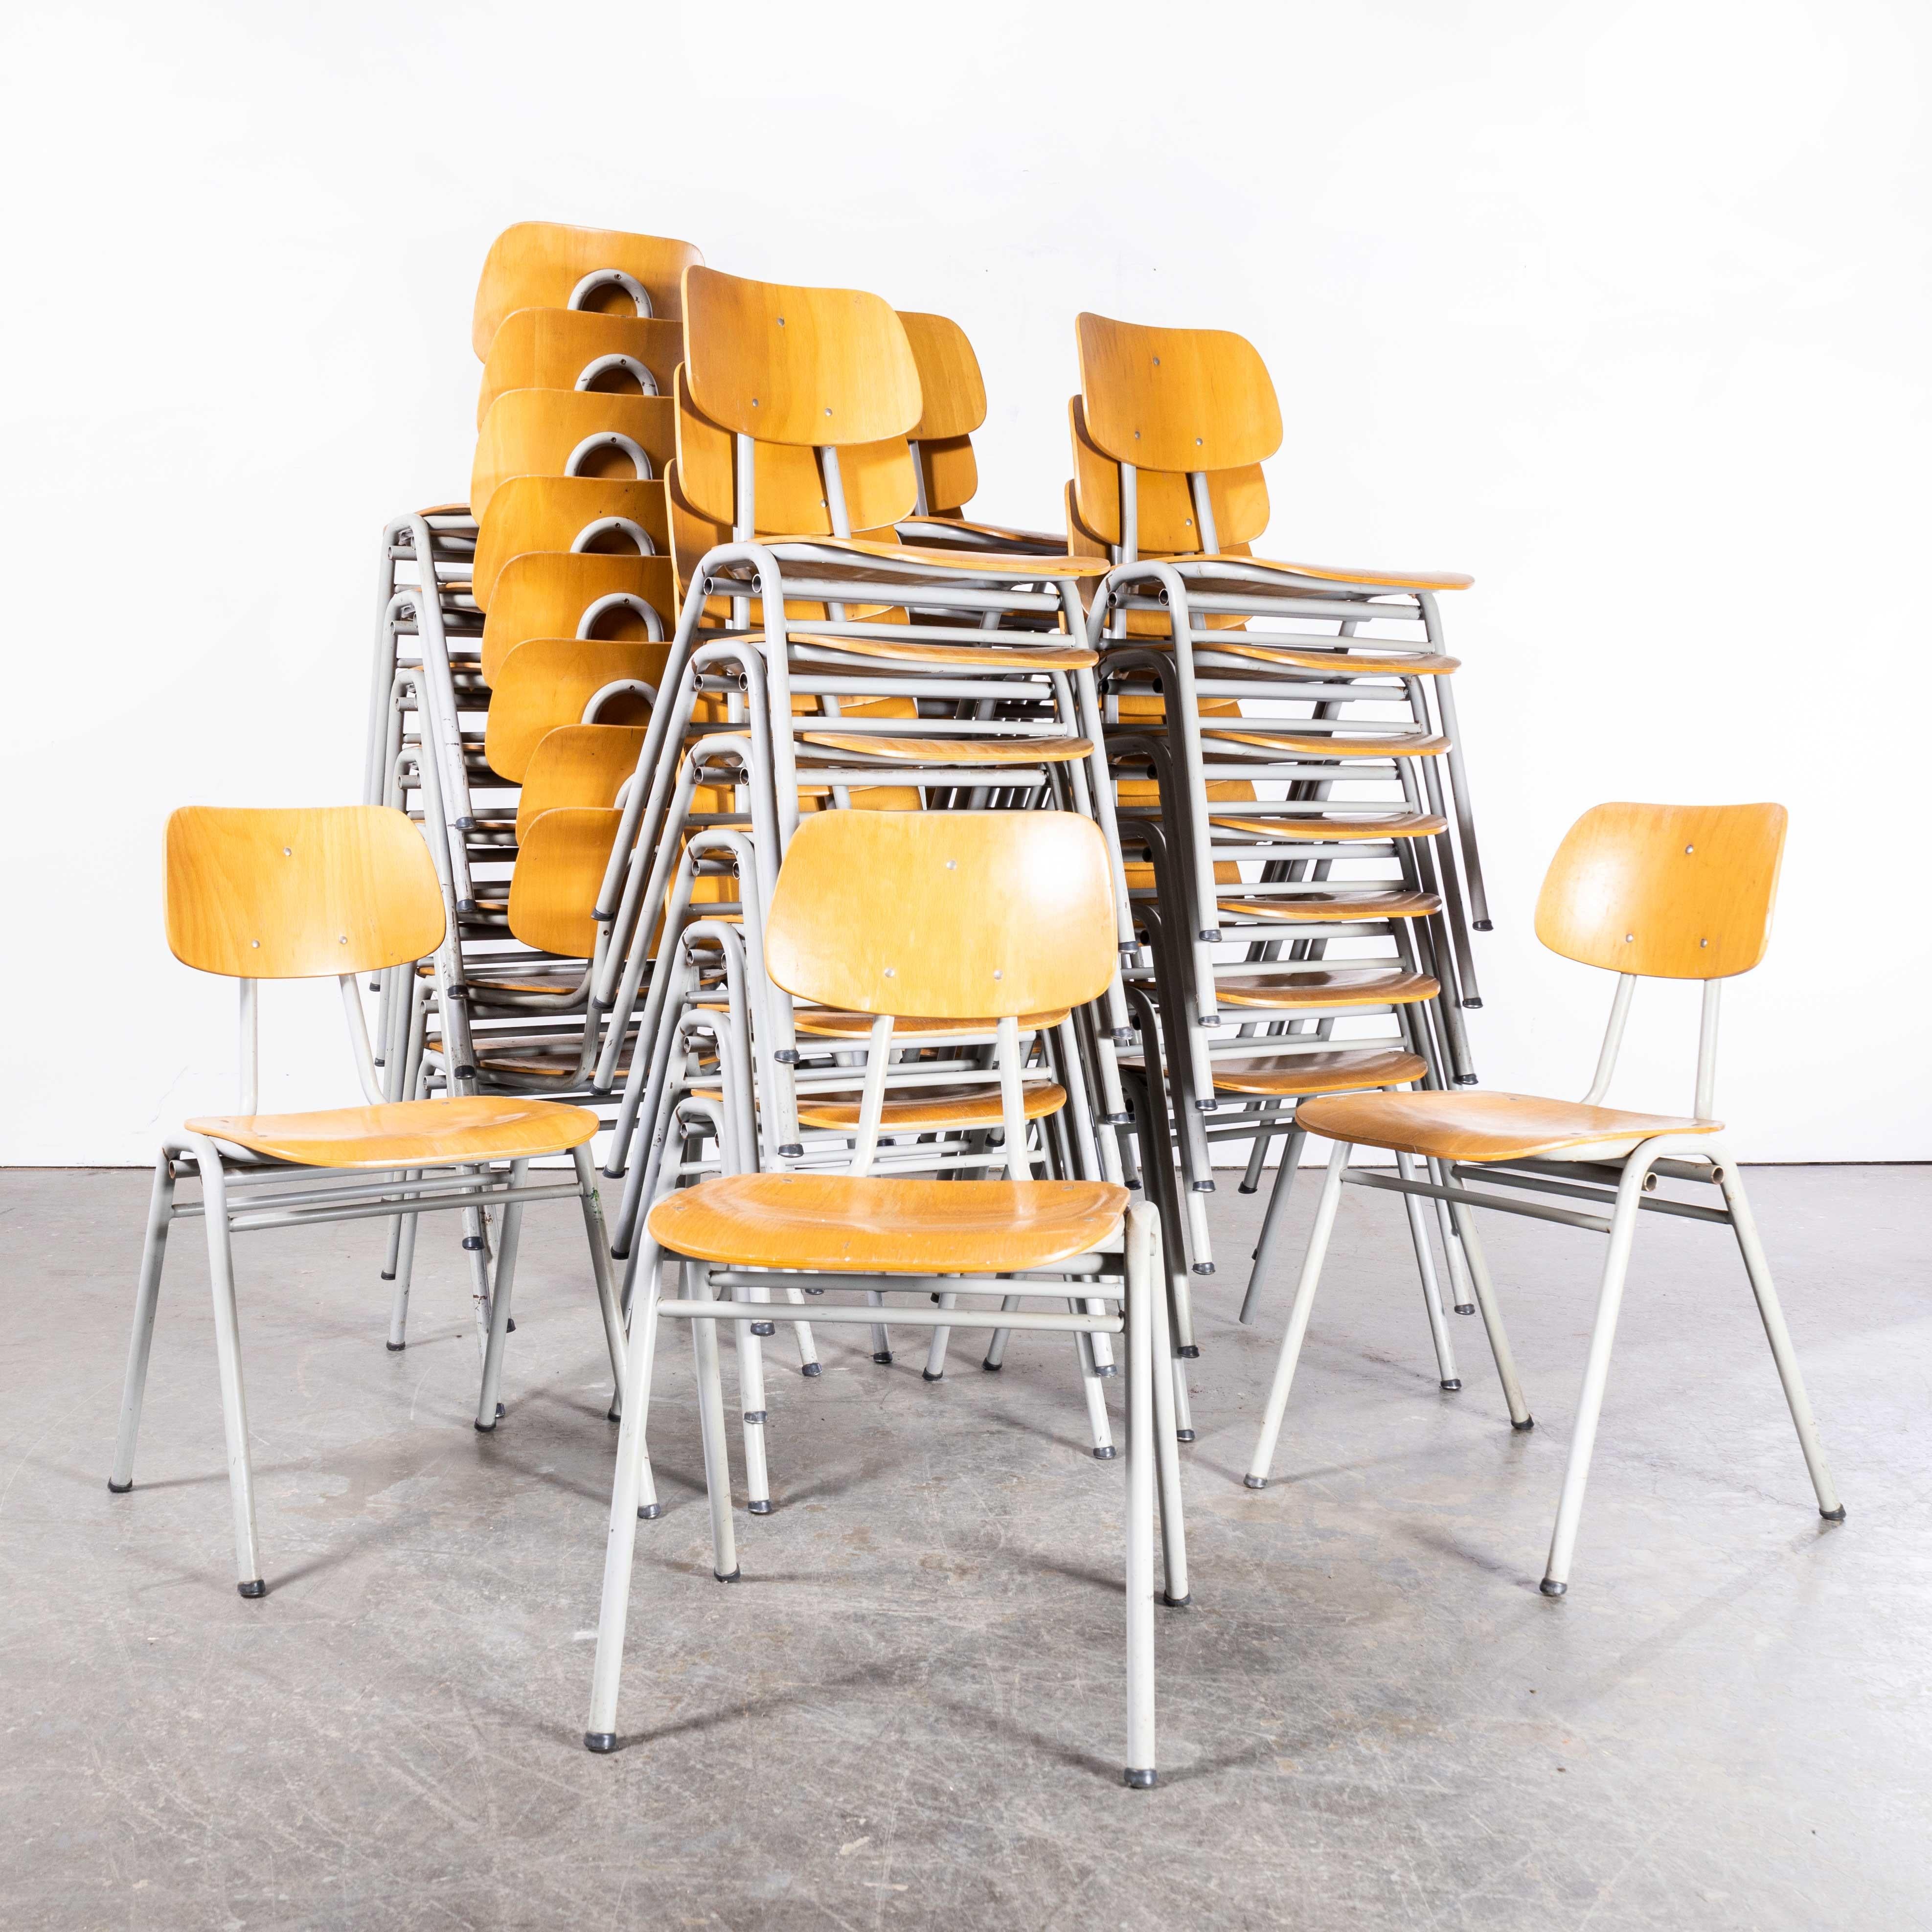 1960's Classic Dutch University Dining Chairs - Various Quantities Available im Angebot 2